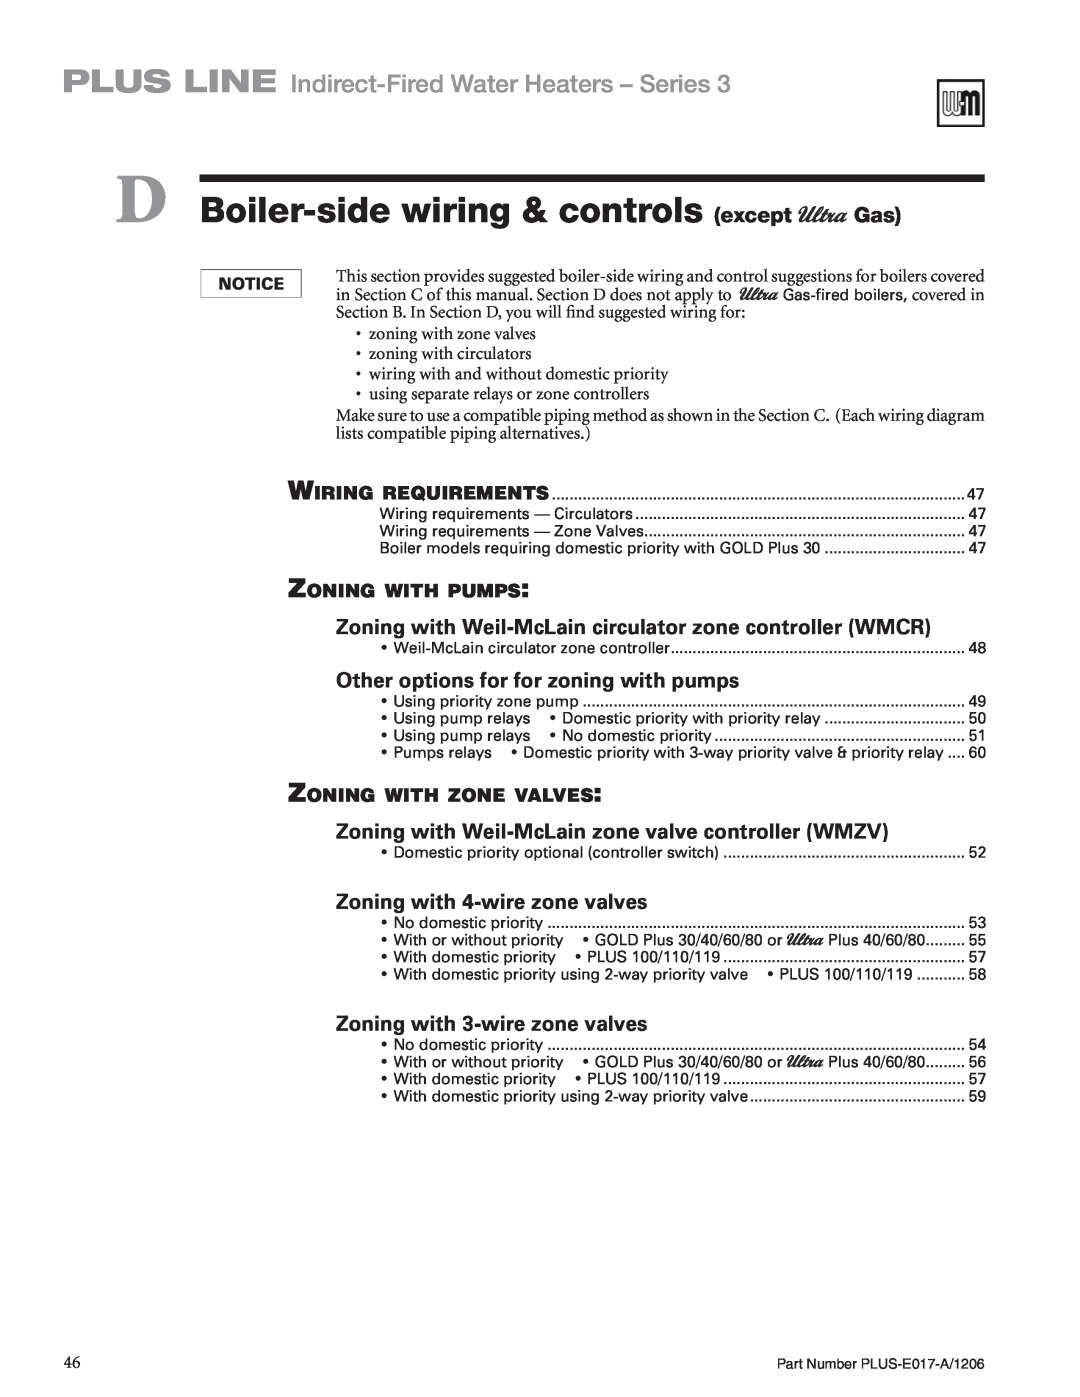 Weil-McLain PLUS-E017-A/1206 manual D Boiler-sidewiring & controls except Gas, Zoning with pumps, Zoning with zone valves 